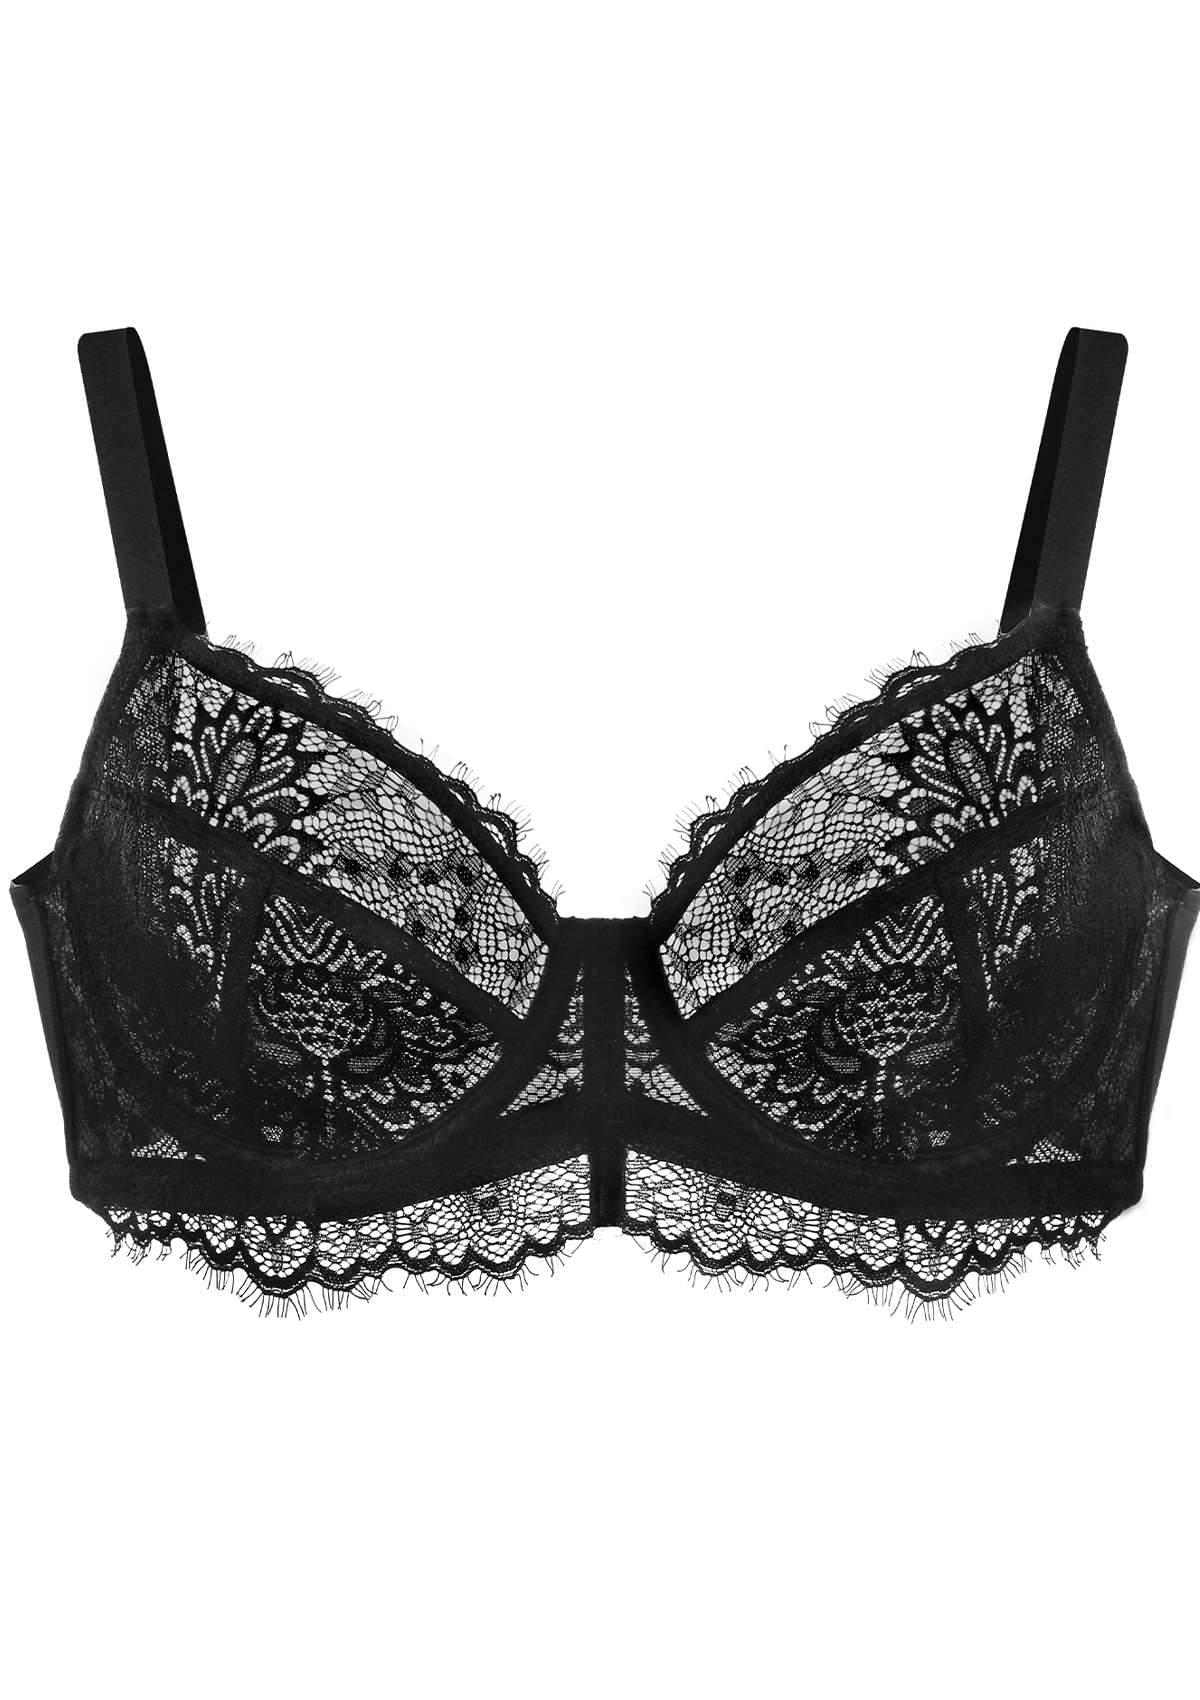 HSIA Sunflower Underwire Lace Bra: Unlined Full Coverage Support Bra - Black / 36 / D